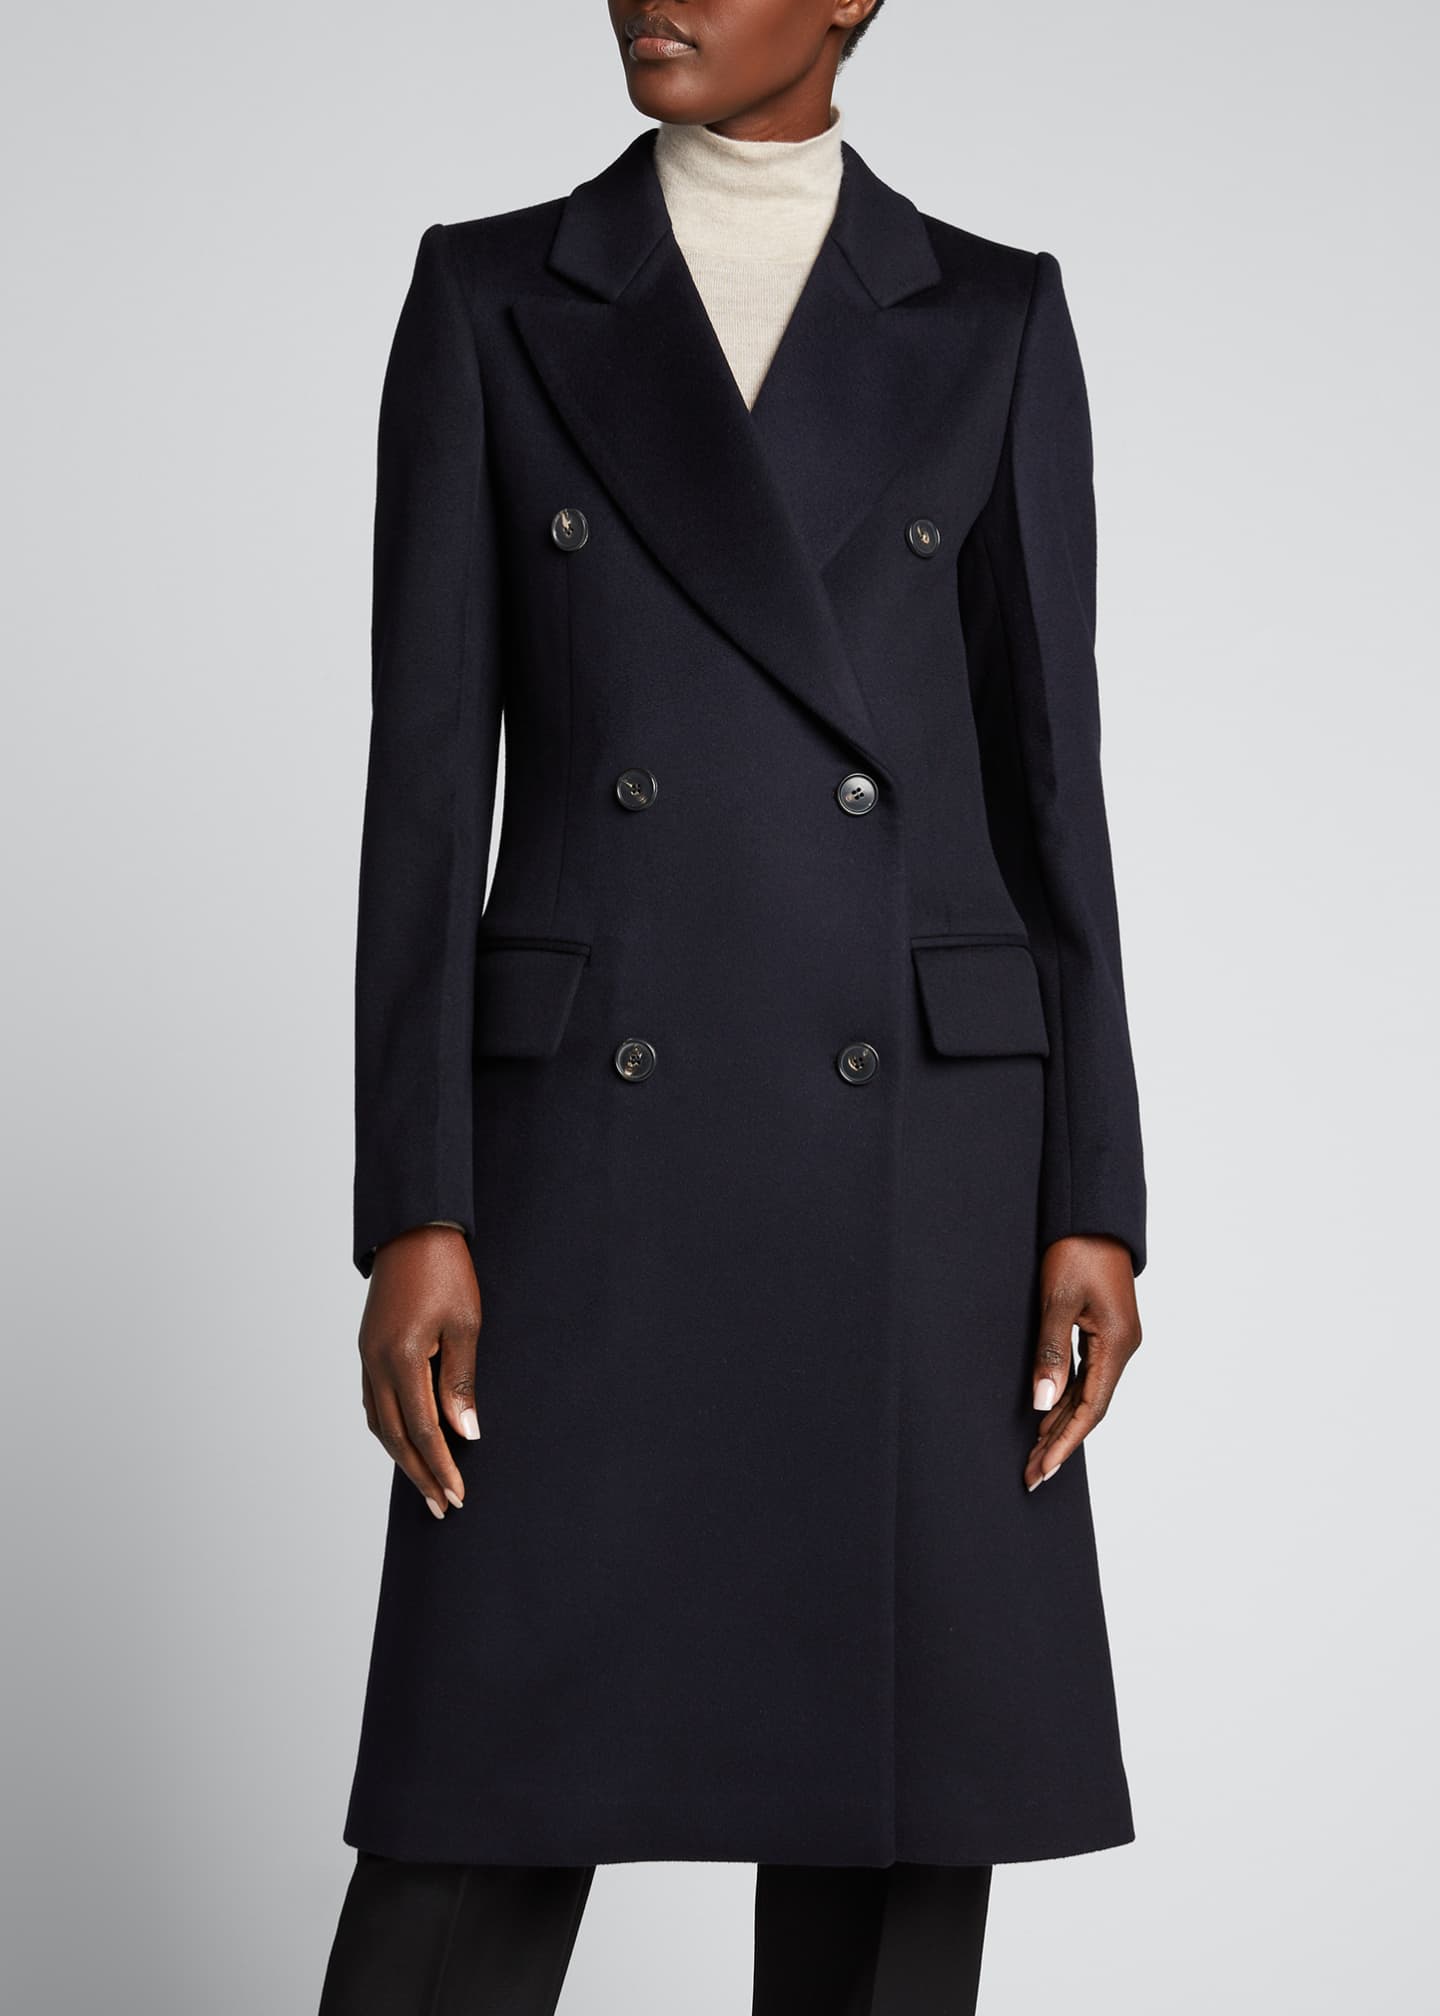 Victoria Beckham Double-Breasted Wool-Cashmere Coat - Bergdorf Goodman